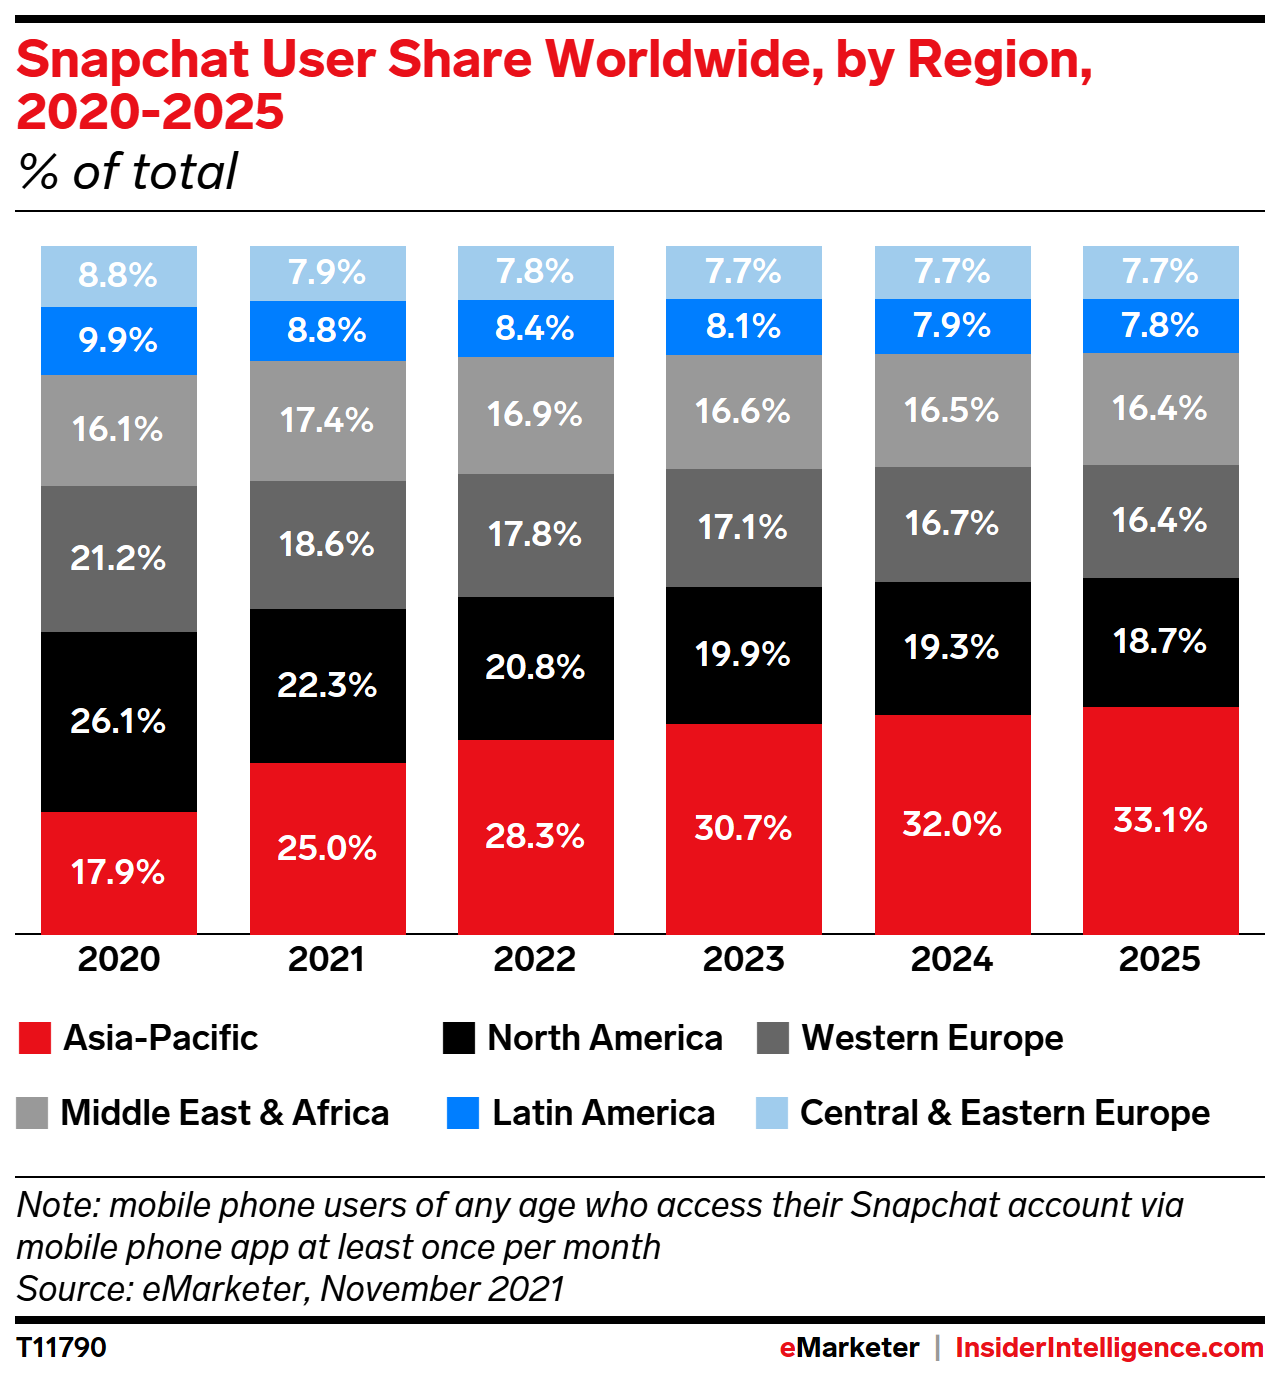 Snapchat Users Worldwide, by Region, 2020-2025 (% of total)